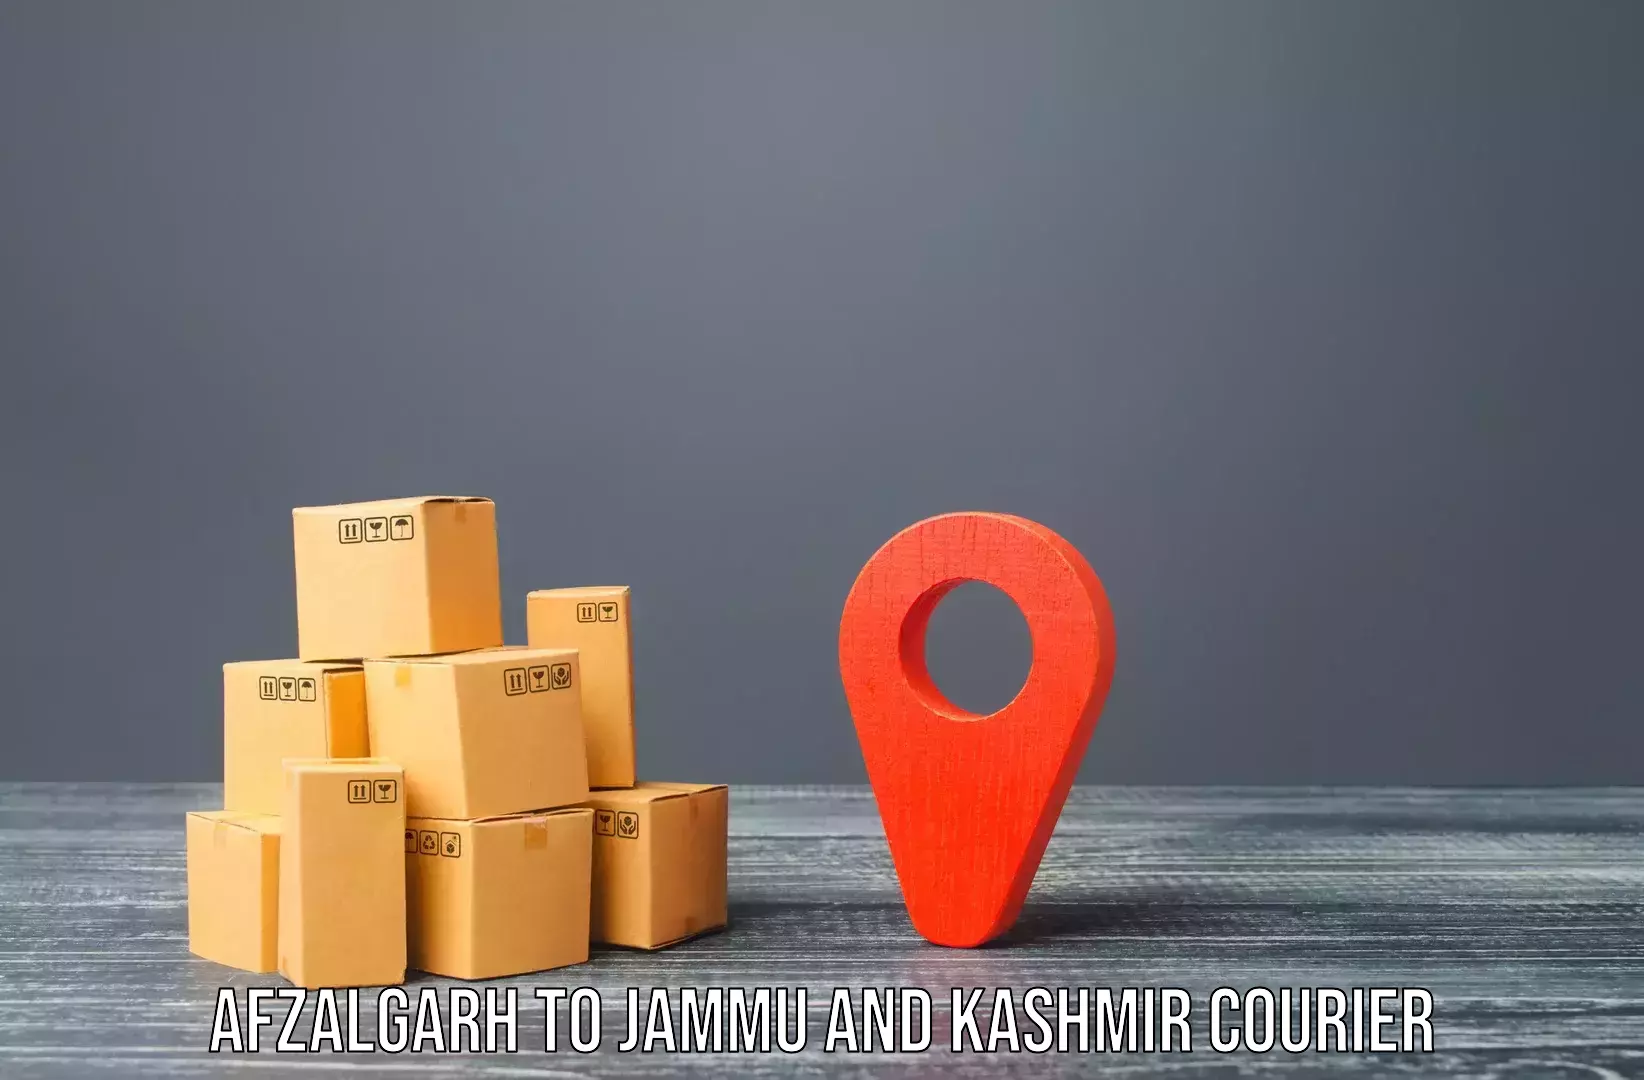 Home shifting services Afzalgarh to Jammu and Kashmir